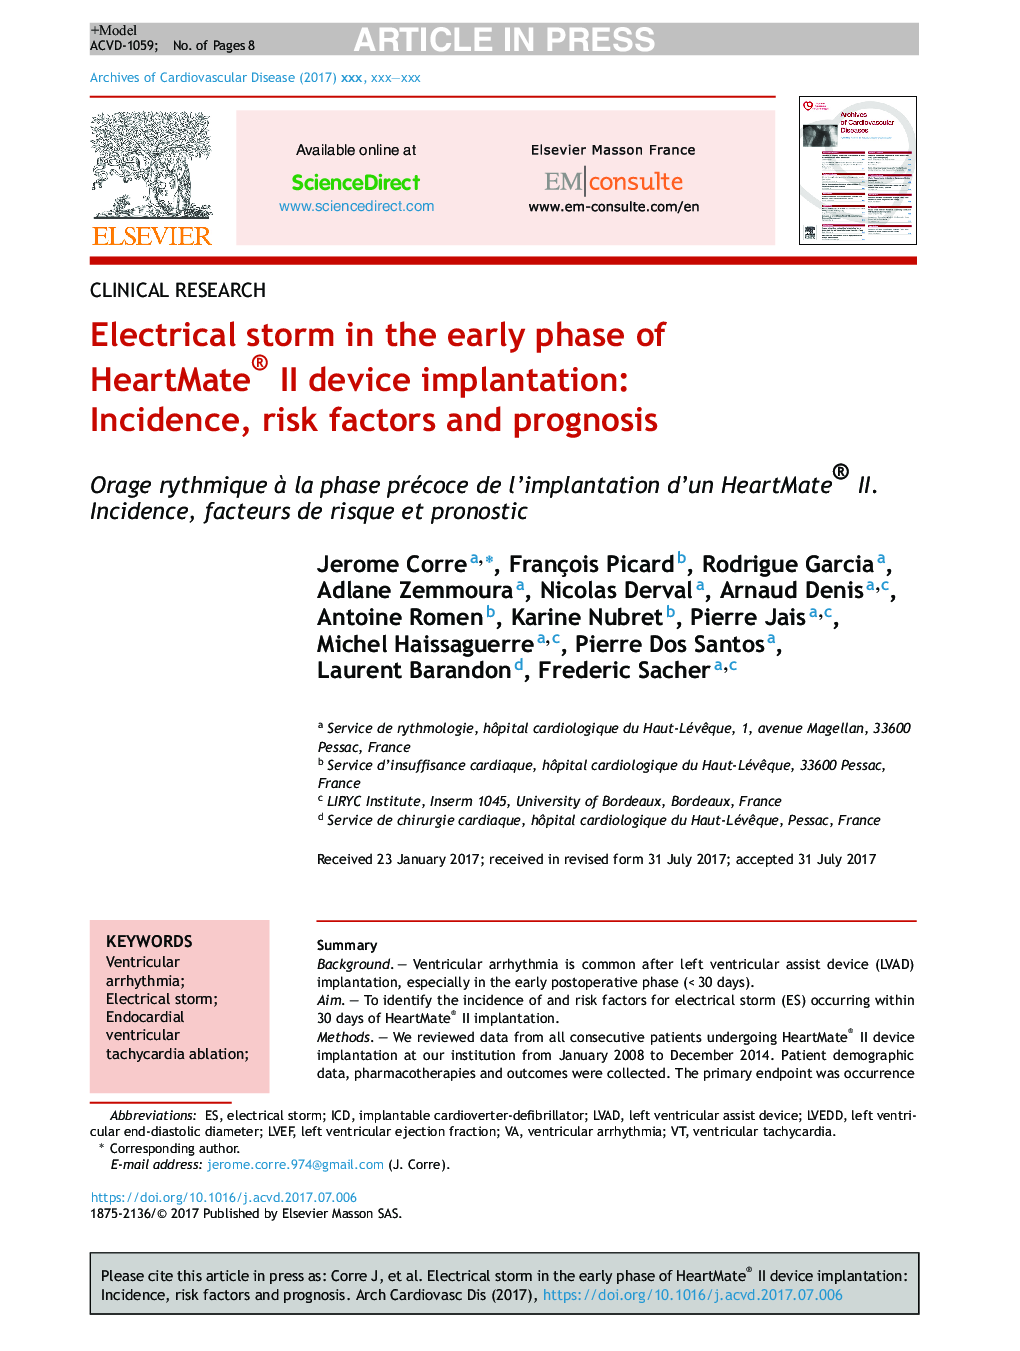 Electrical storm in the early phase of HeartMate® II device implantation: Incidence, risk factors and prognosis